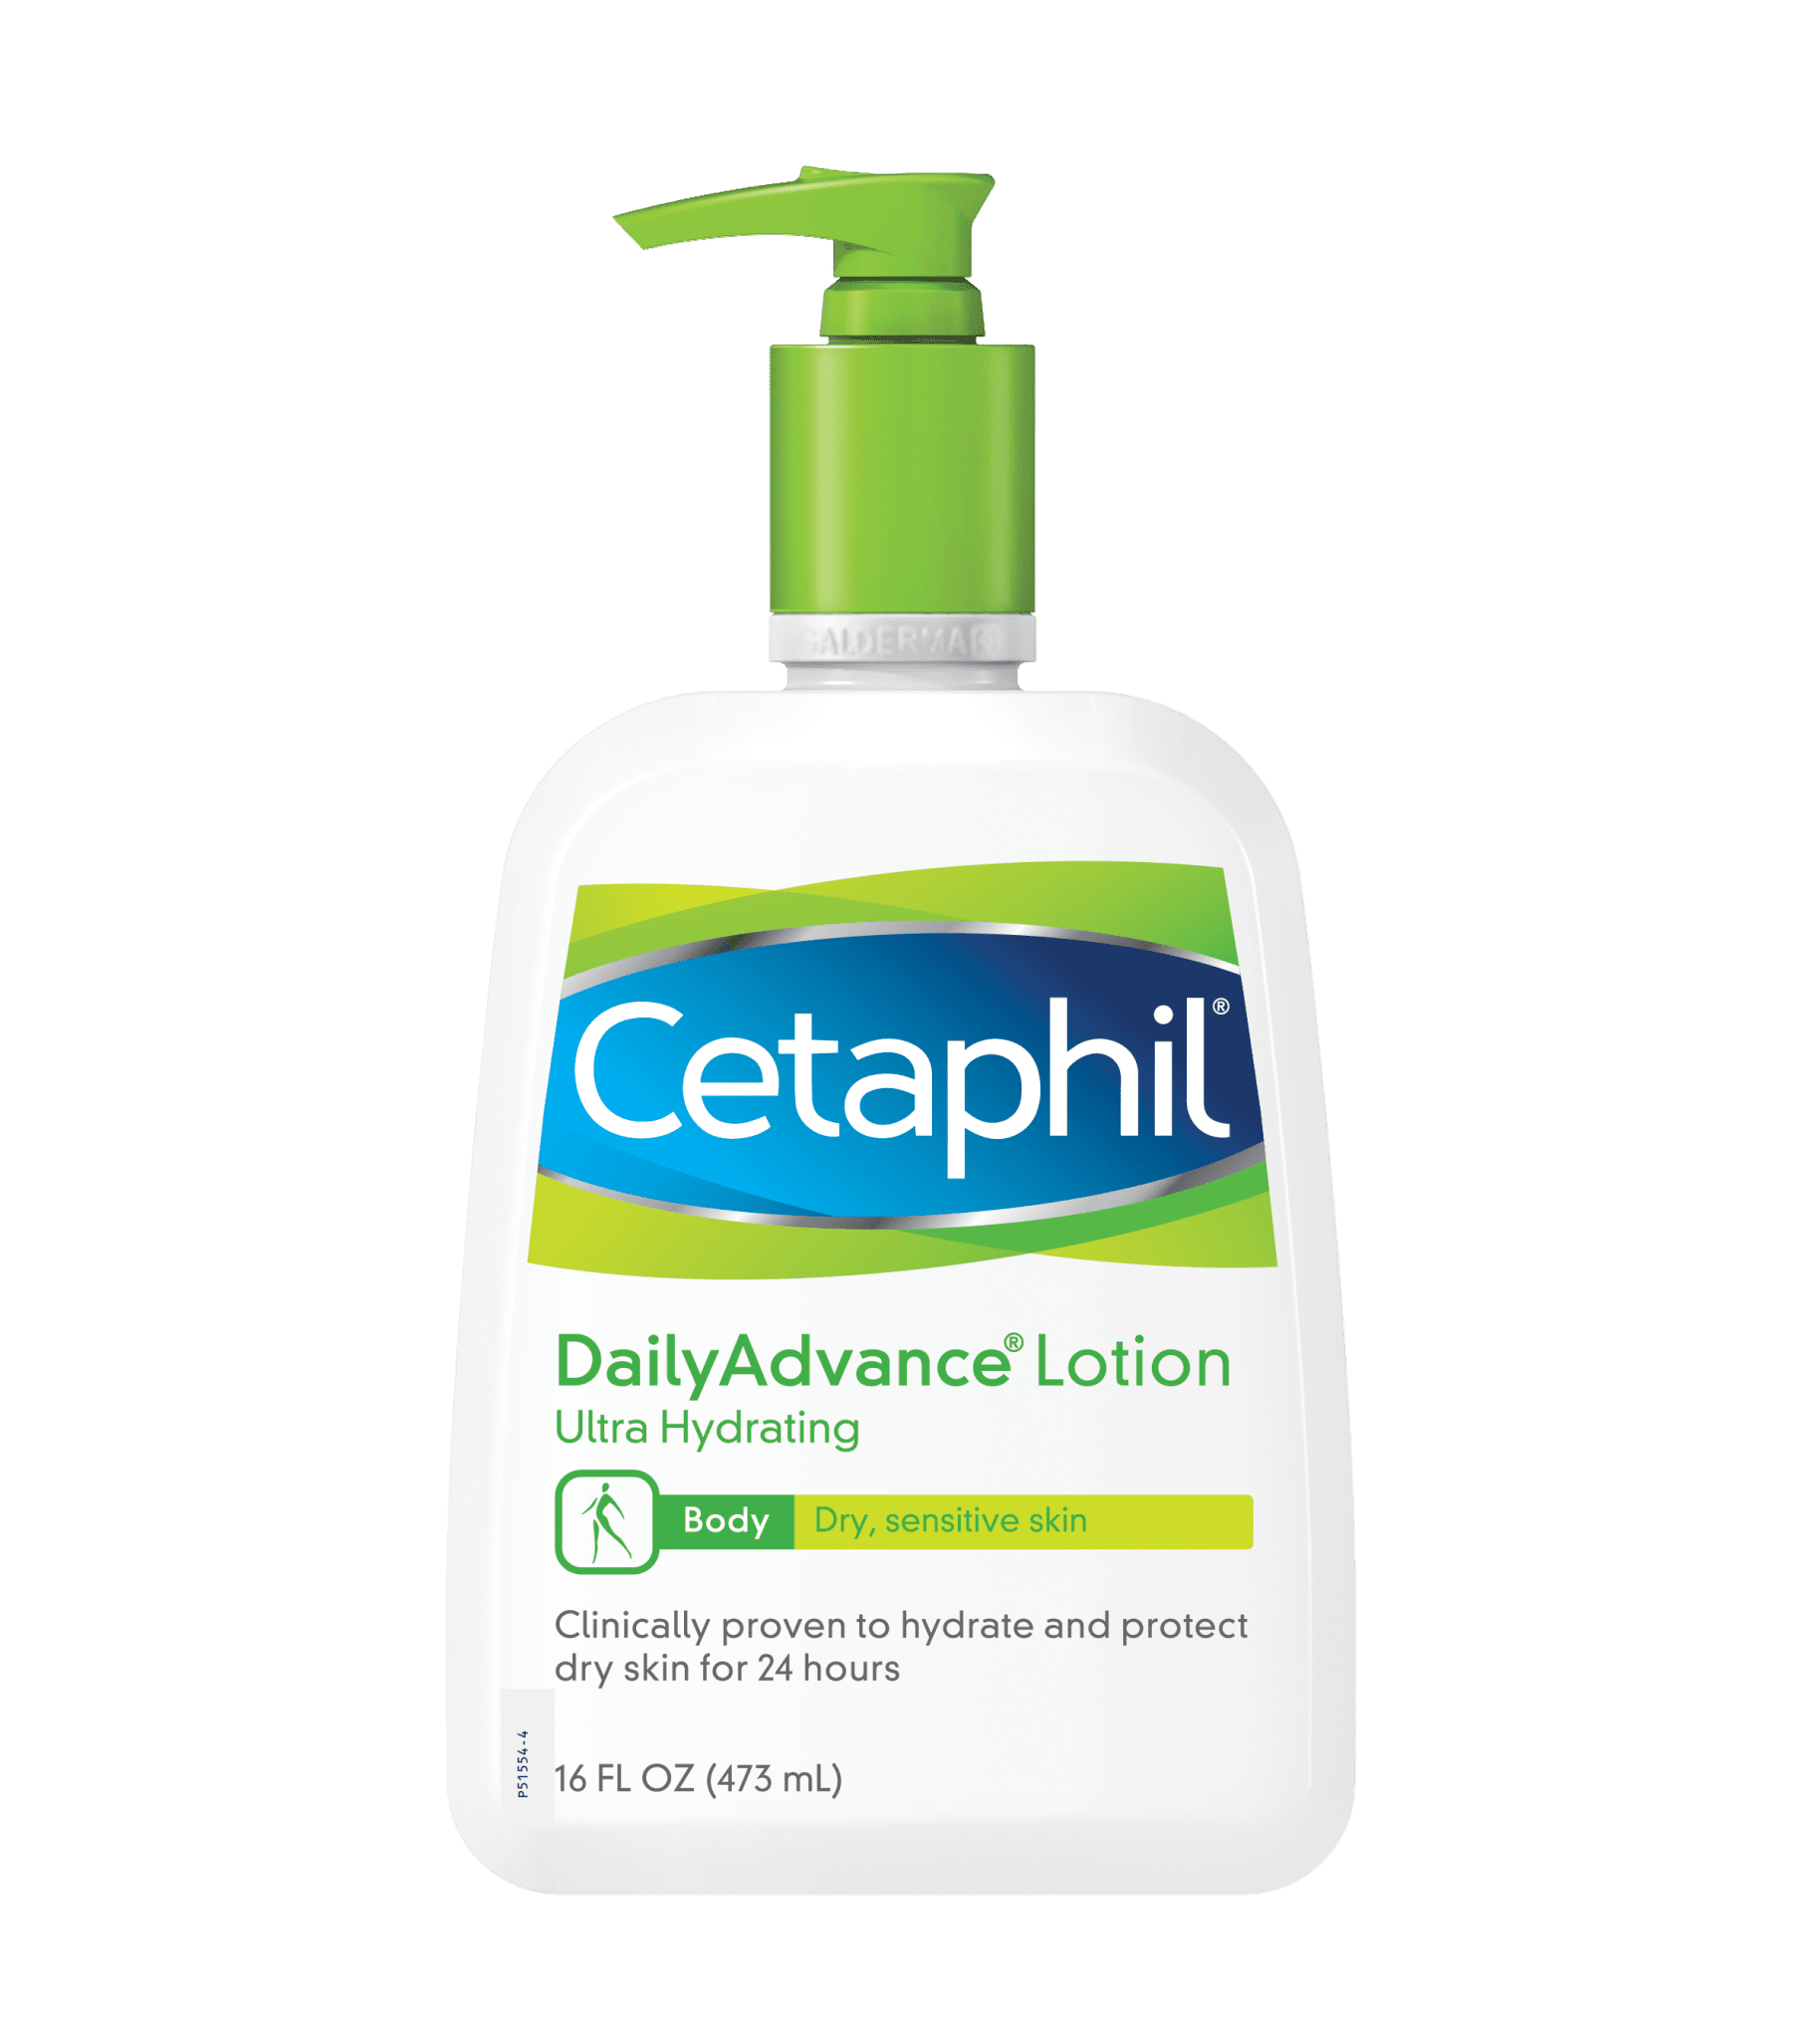 cetaphil moisturizing lotion for baby uses